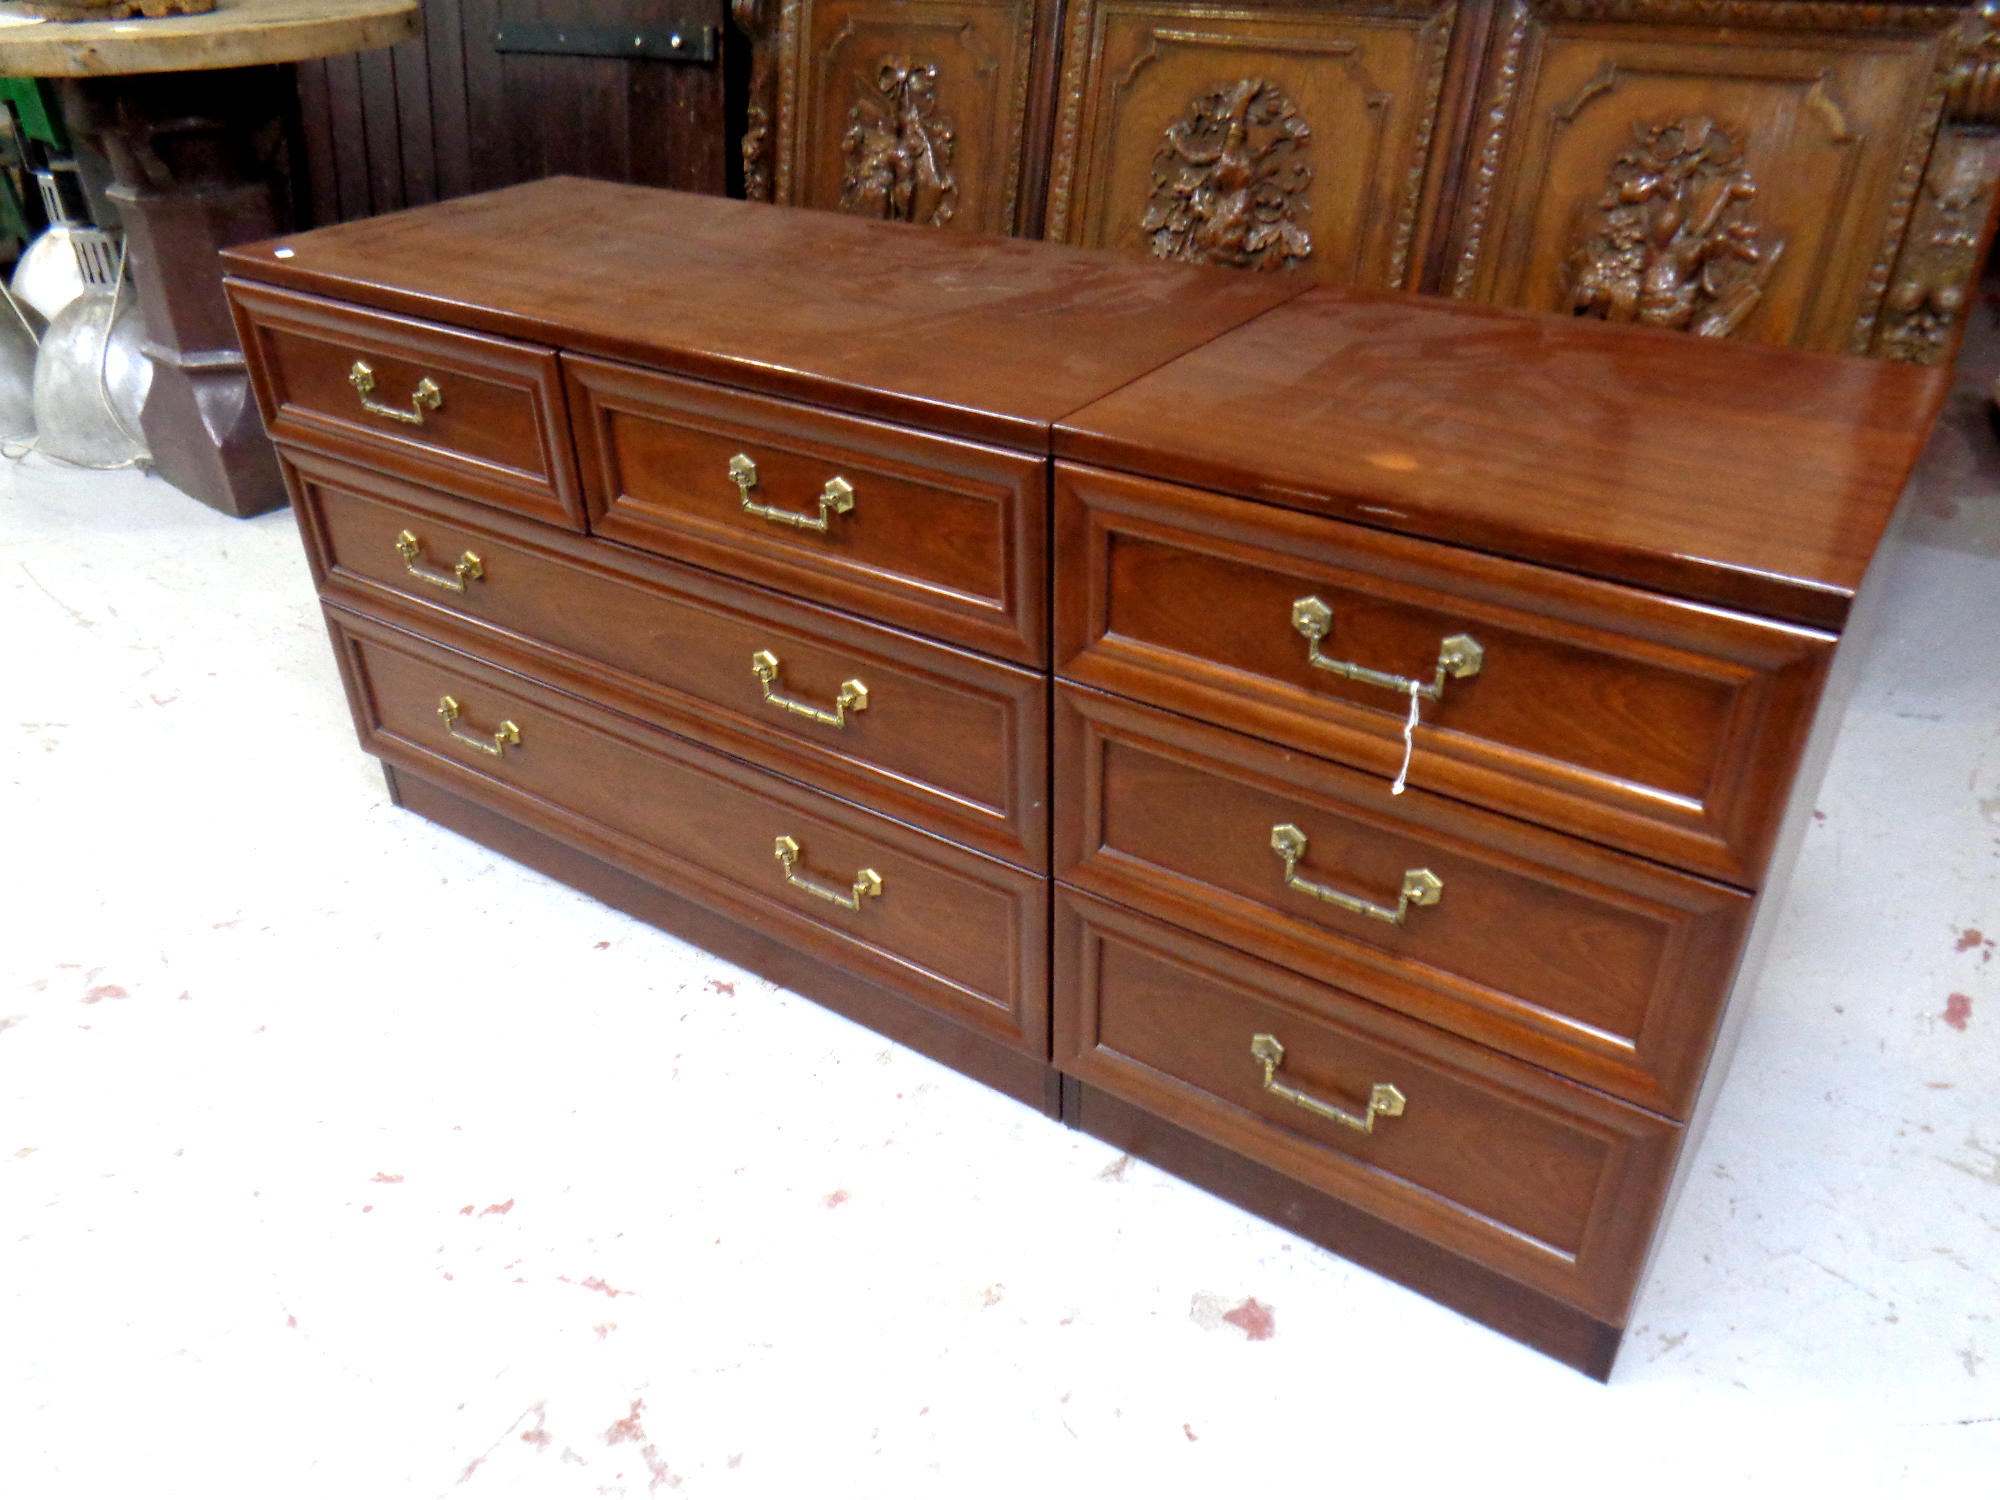 A 20th century G Plan four drawer chest together with three drawer bedside chest in a mahogany